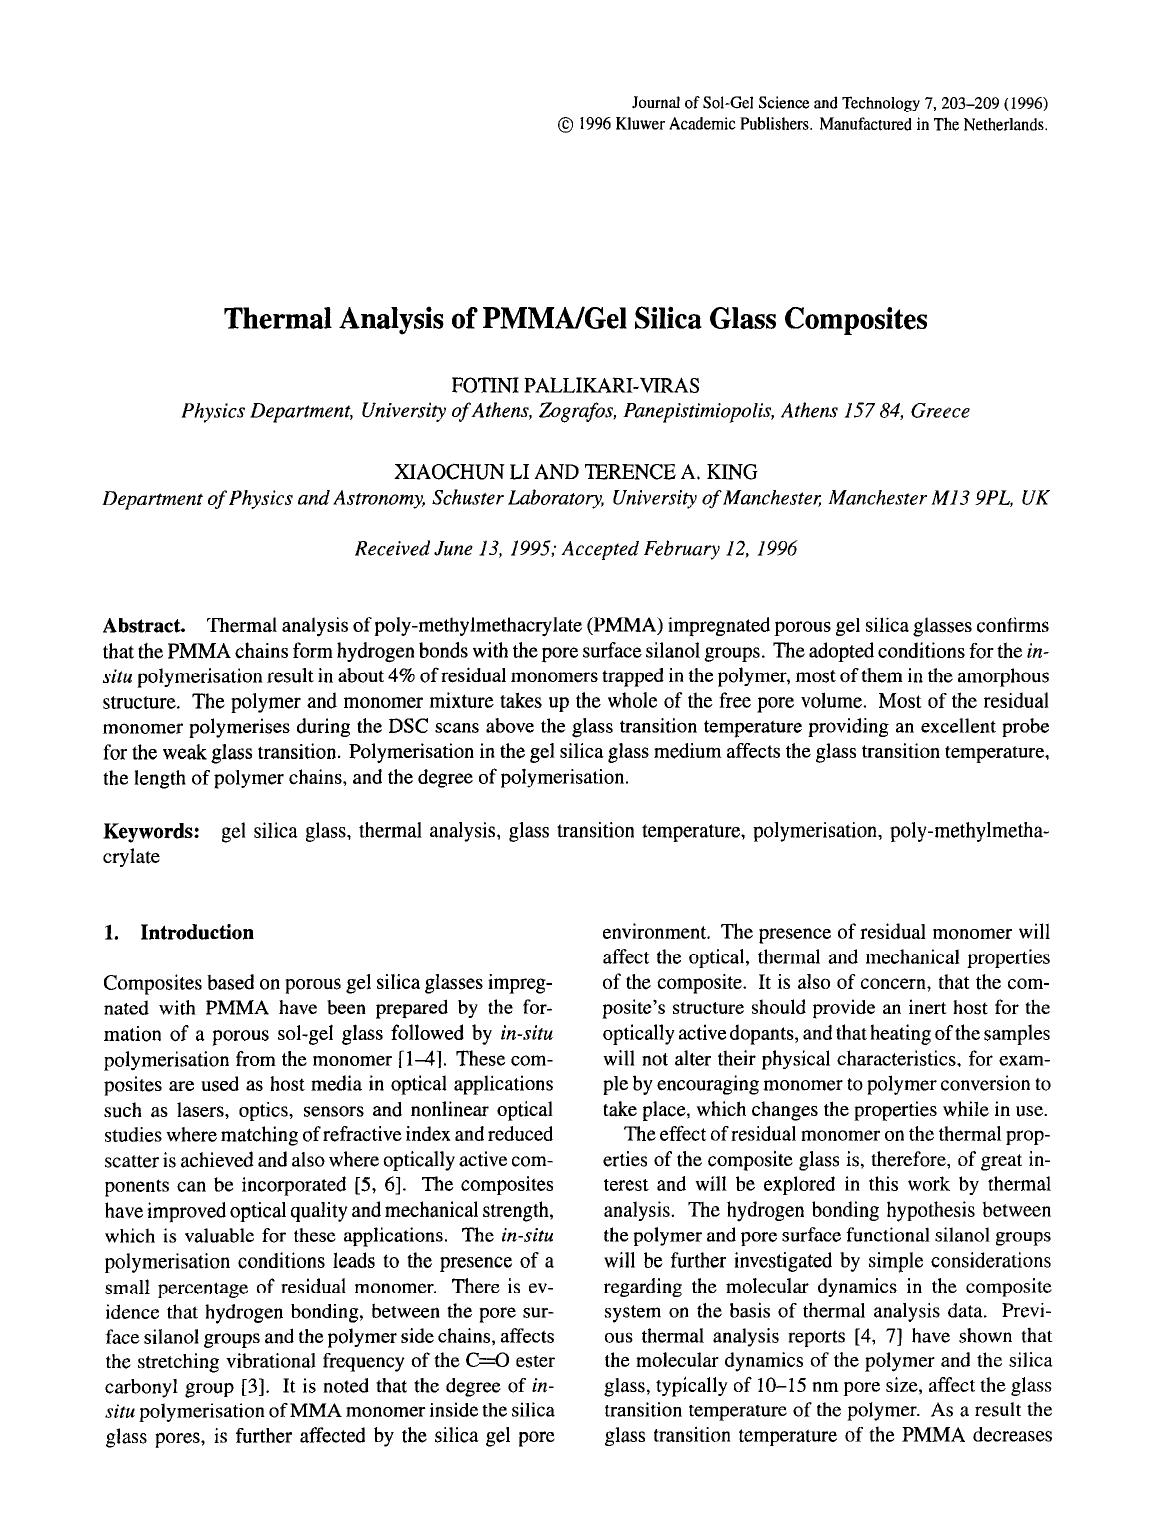 Thermal analysis of PMMAgel silica glass composites by Unknown